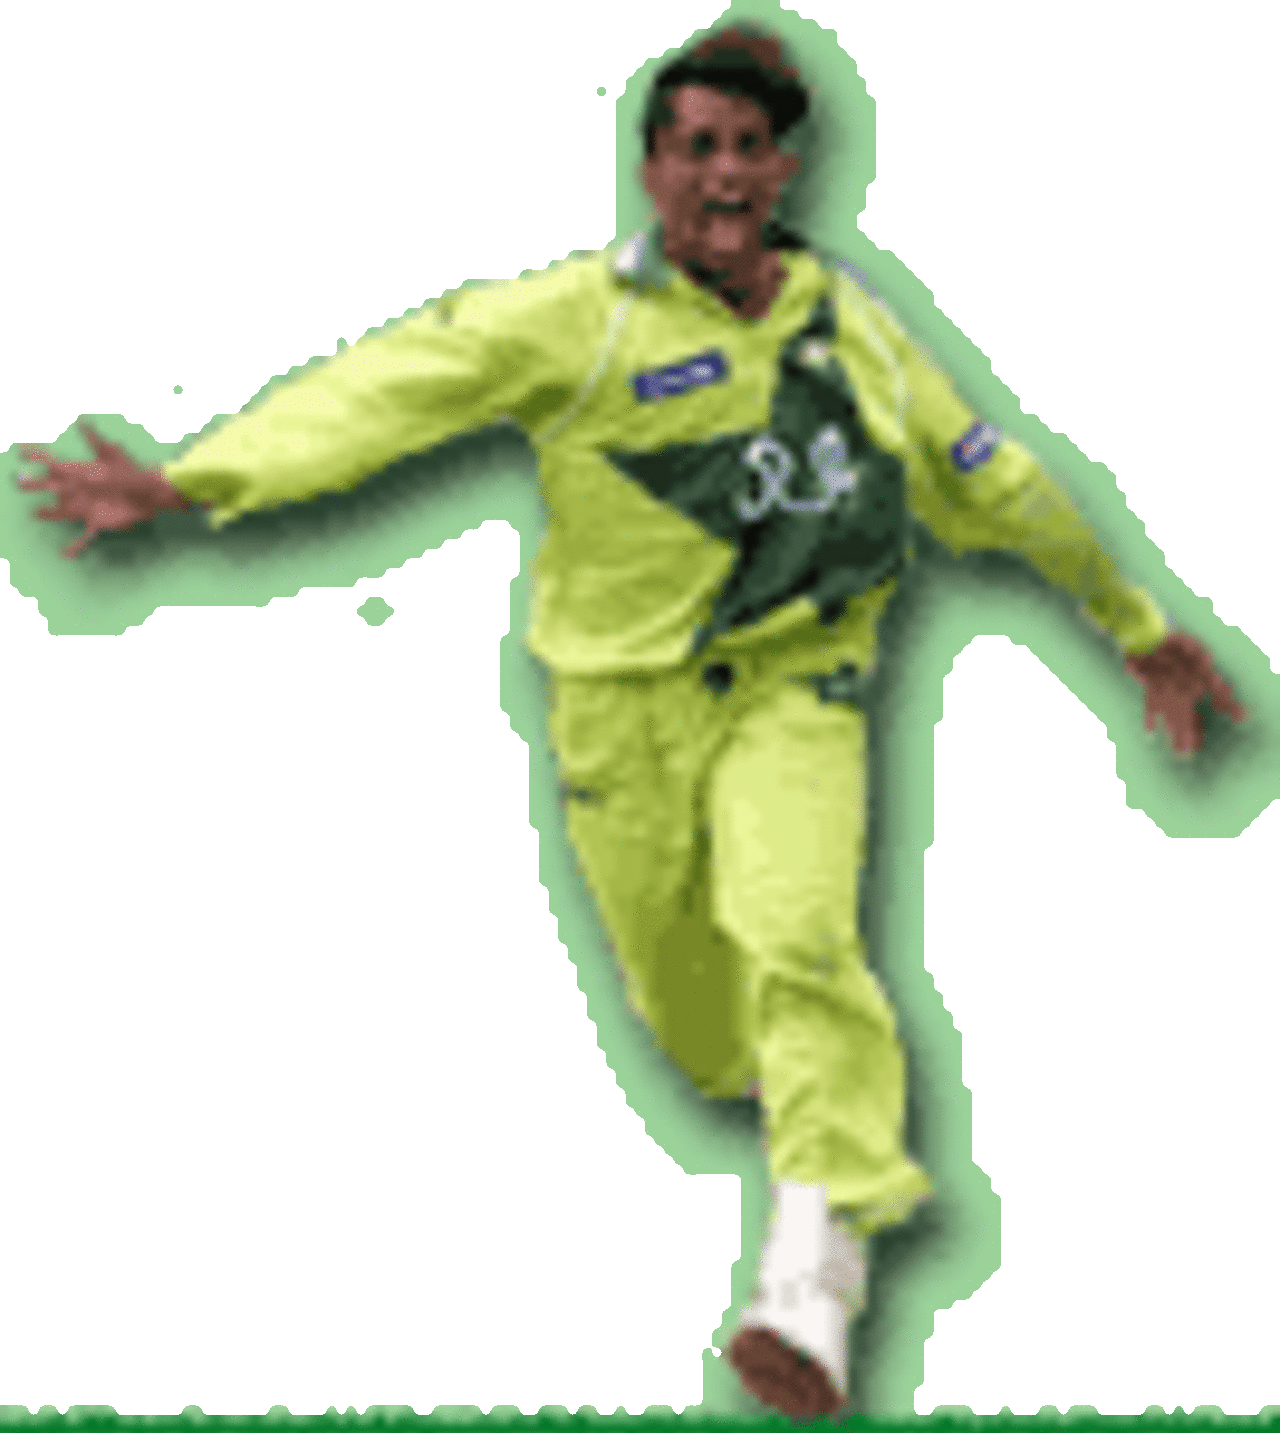 Shoaib Akhtar in fine form in the WC99 semi-final match against New Zealand at Old Trafford, 16 June 1999